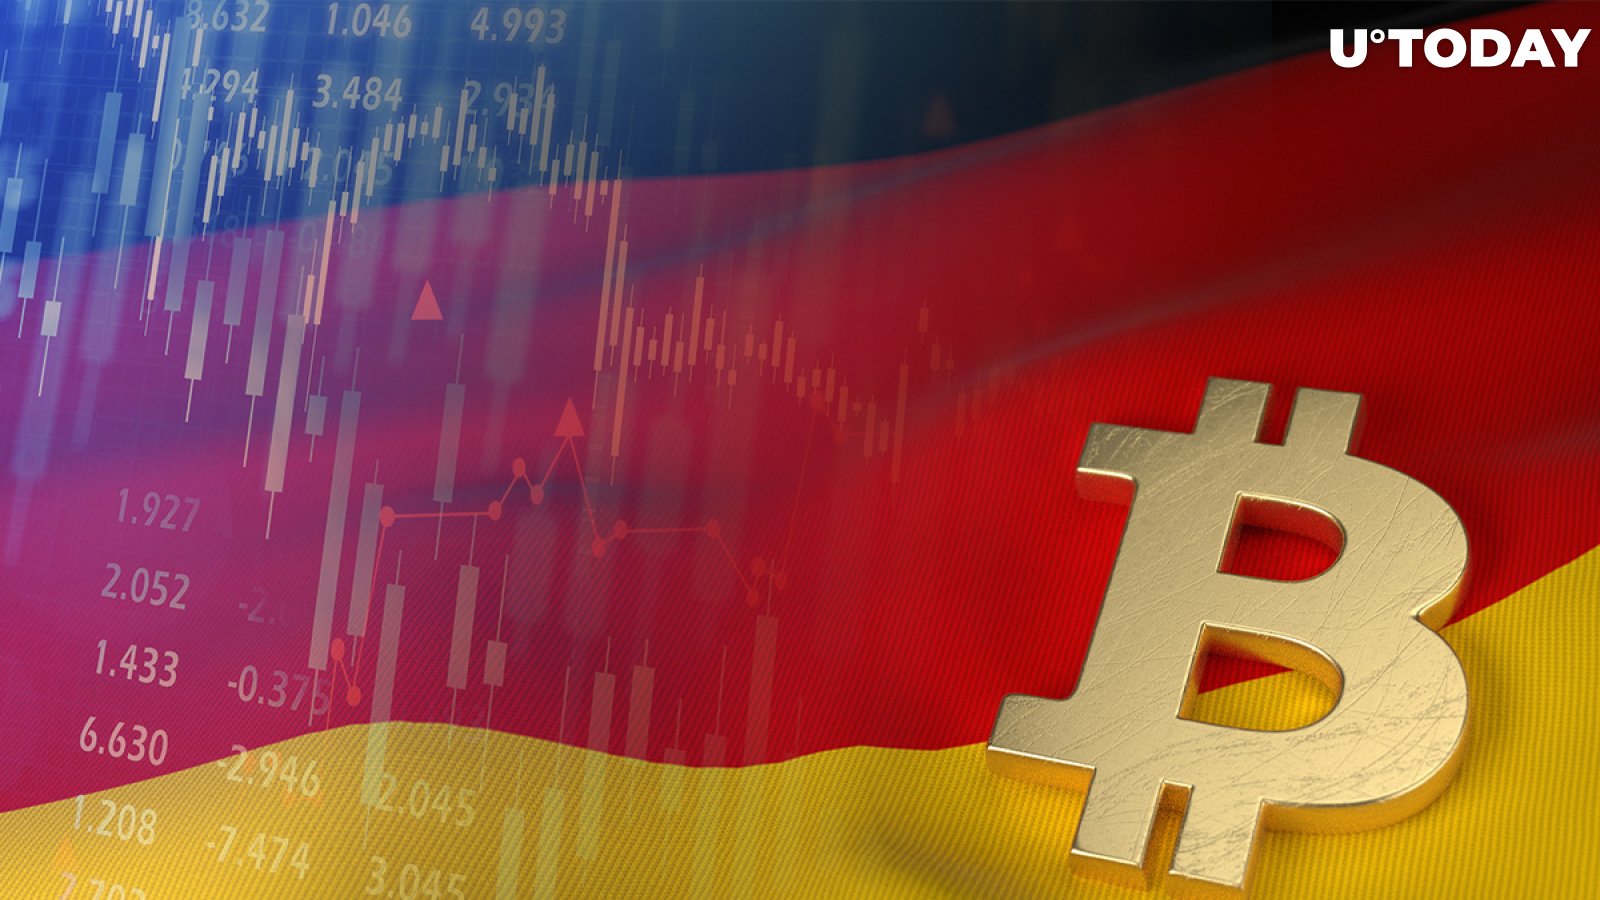 German Institutional Funds Will Be Able to Invest Hundreds of Billions of Euros in Crypto Starting from Next Week